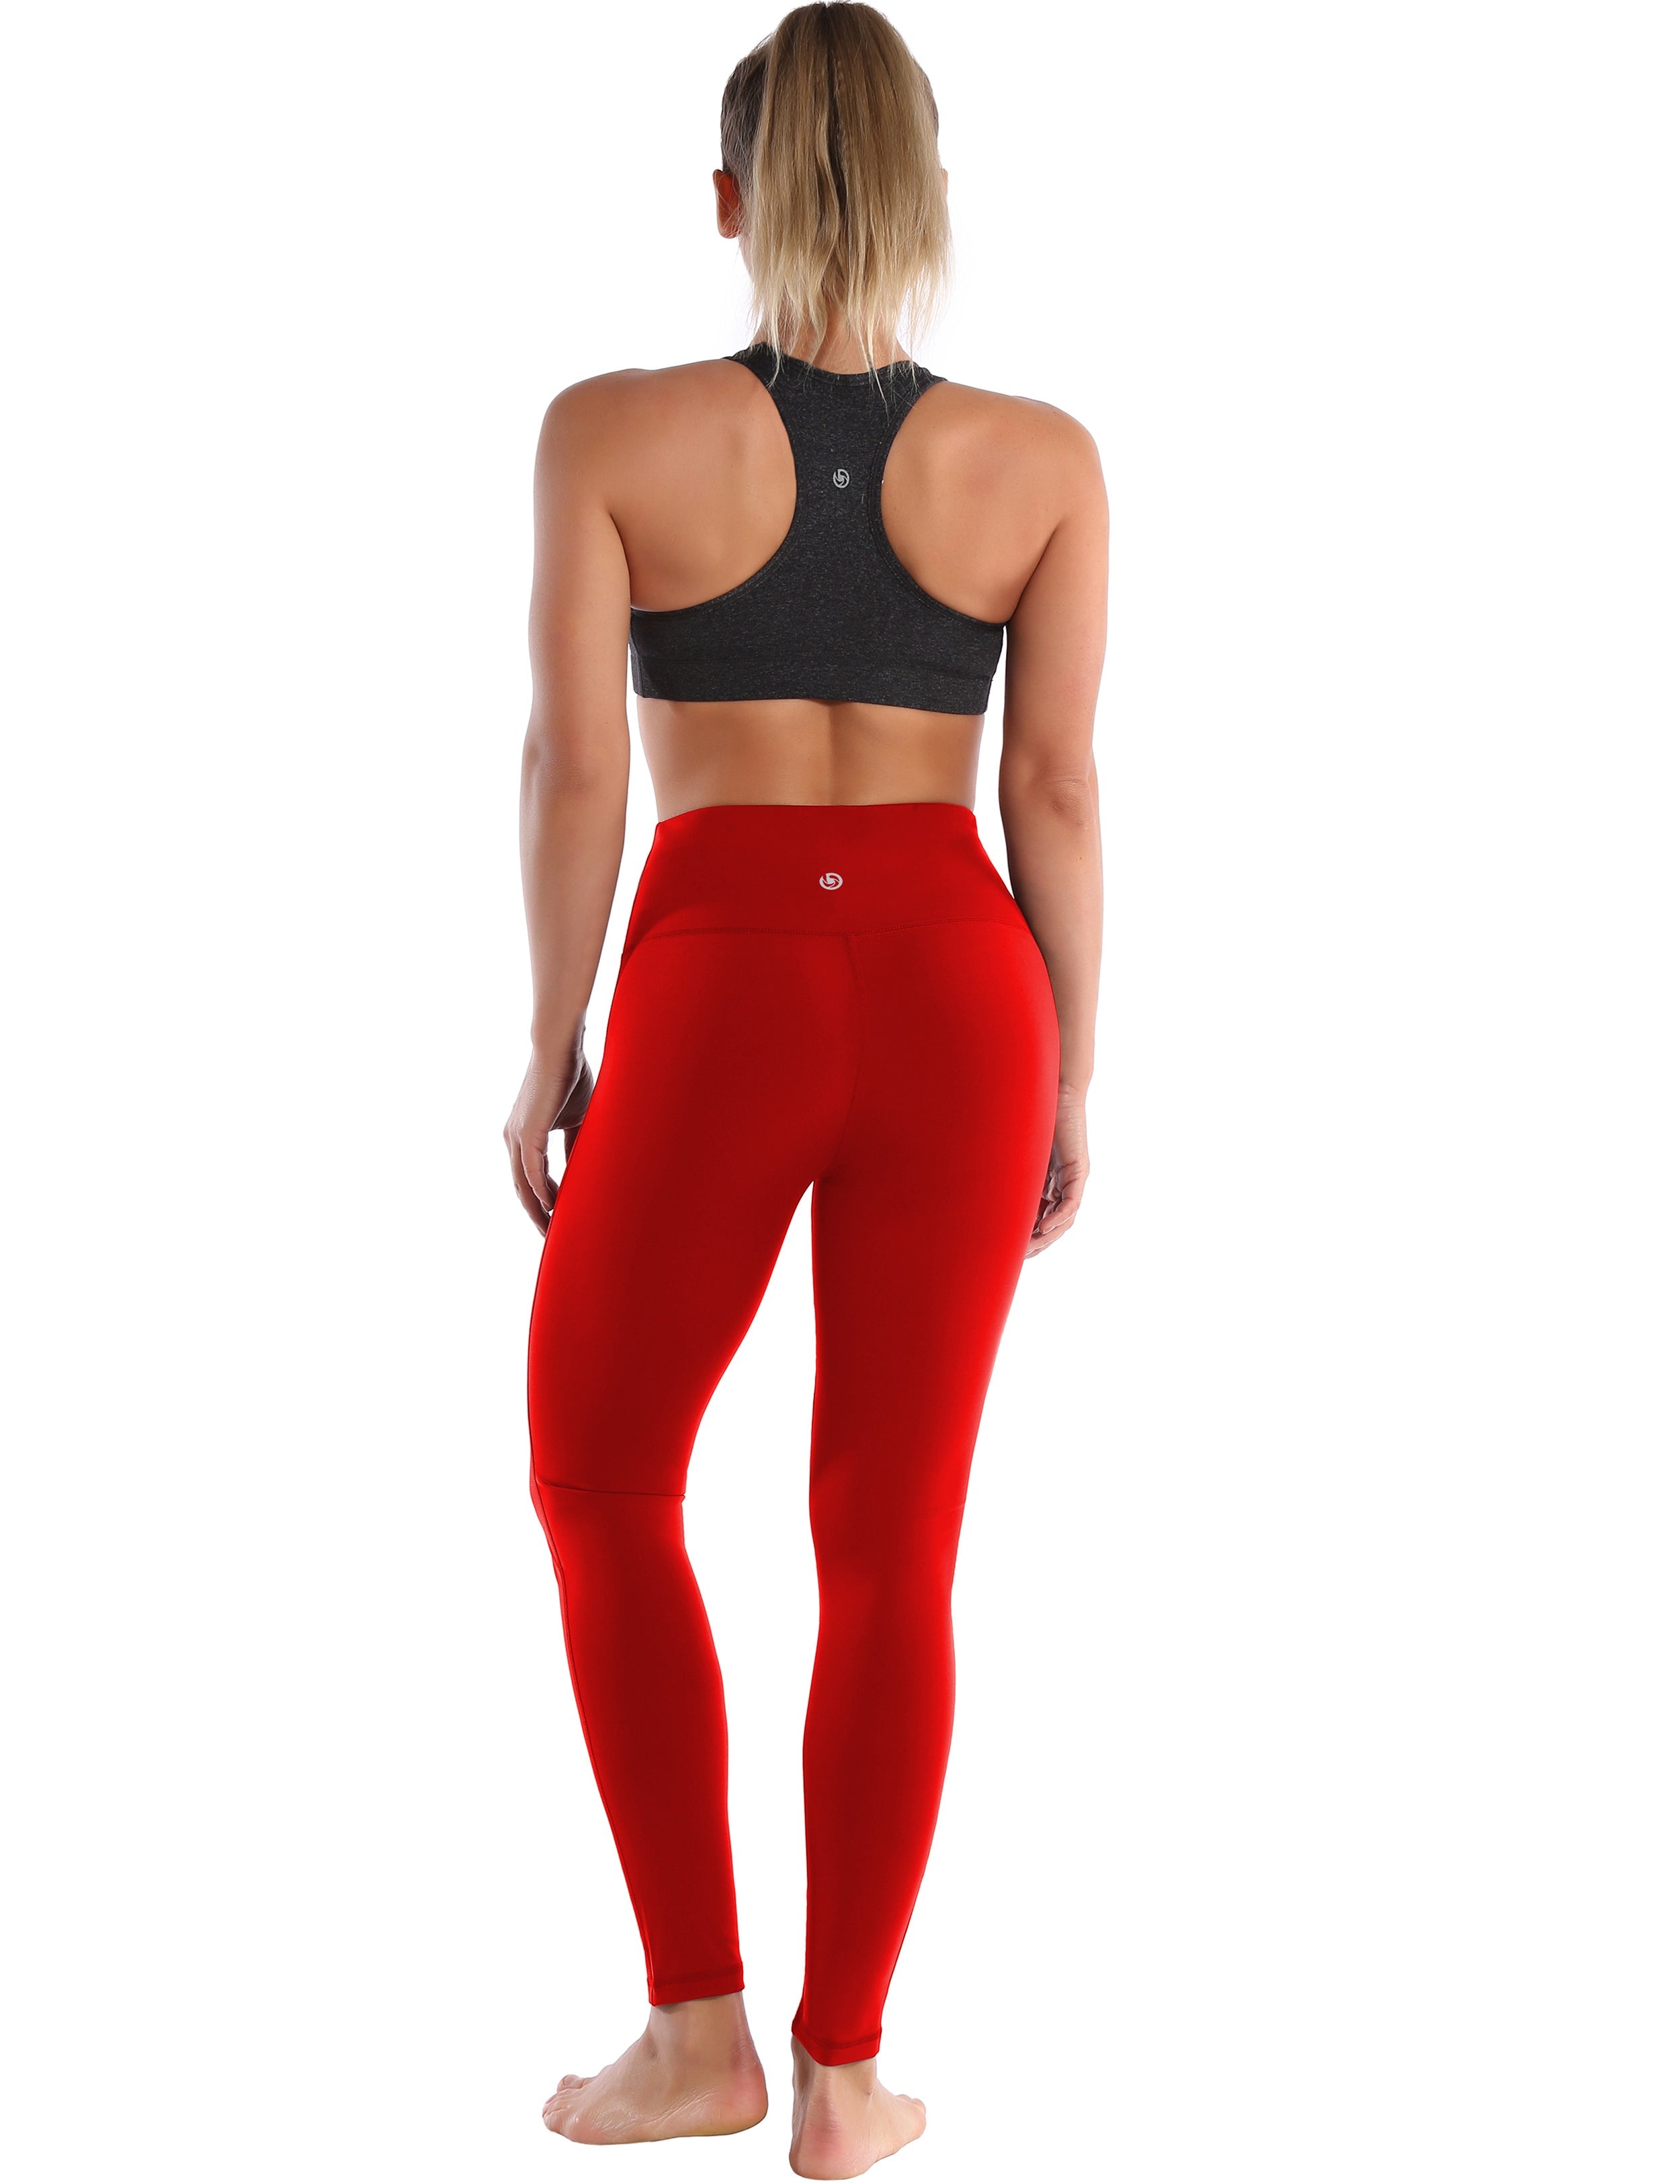 High Waist Side Line Jogging Pants scarlet Side Line is Make Your Legs Look Longer and Thinner 75%Nylon/25%Spandex Fabric doesn't attract lint easily 4-way stretch No see-through Moisture-wicking Tummy control Inner pocket Two lengths